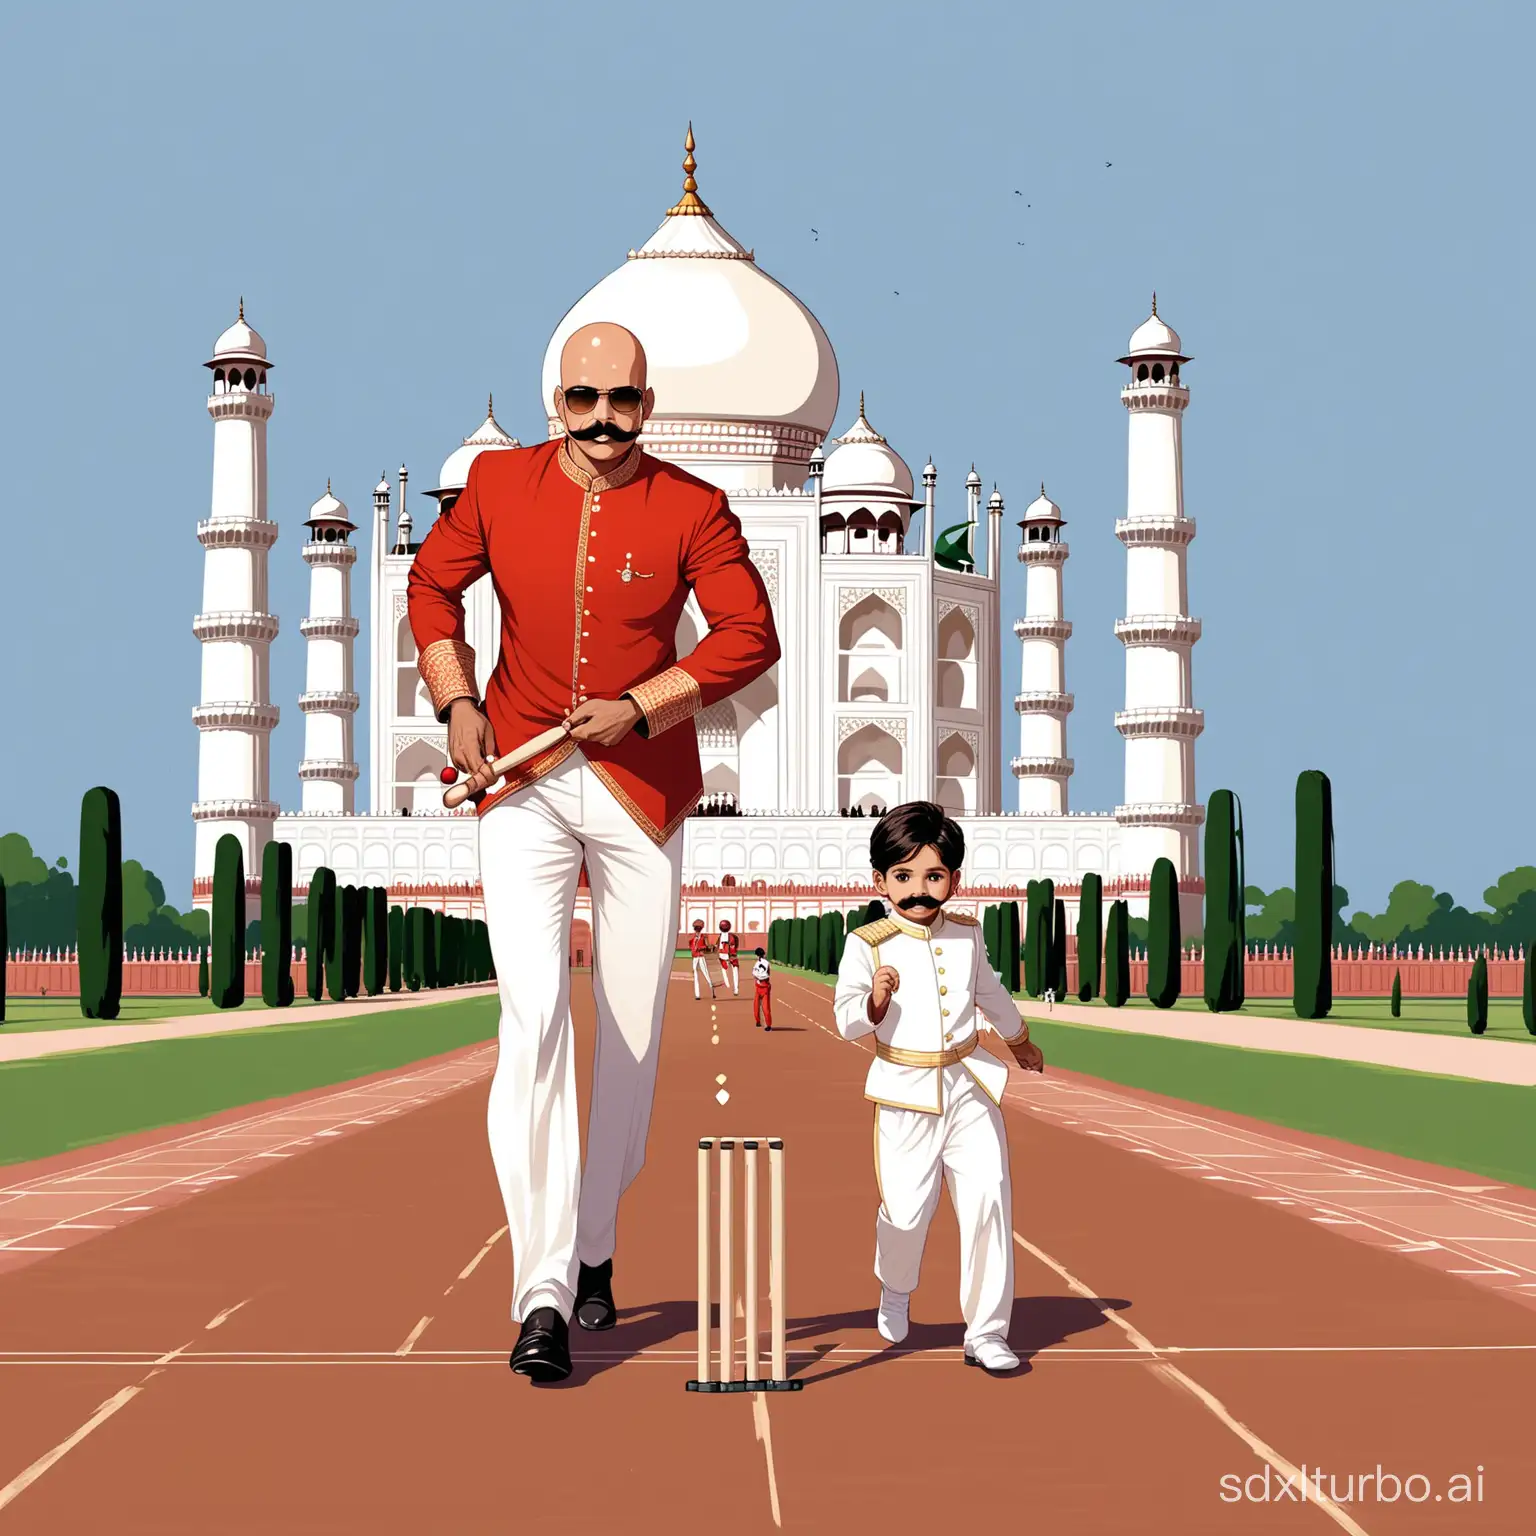 Royal-Indian-King-Playing-Cricket-with-Daughter-in-Front-of-Taj-Mahal